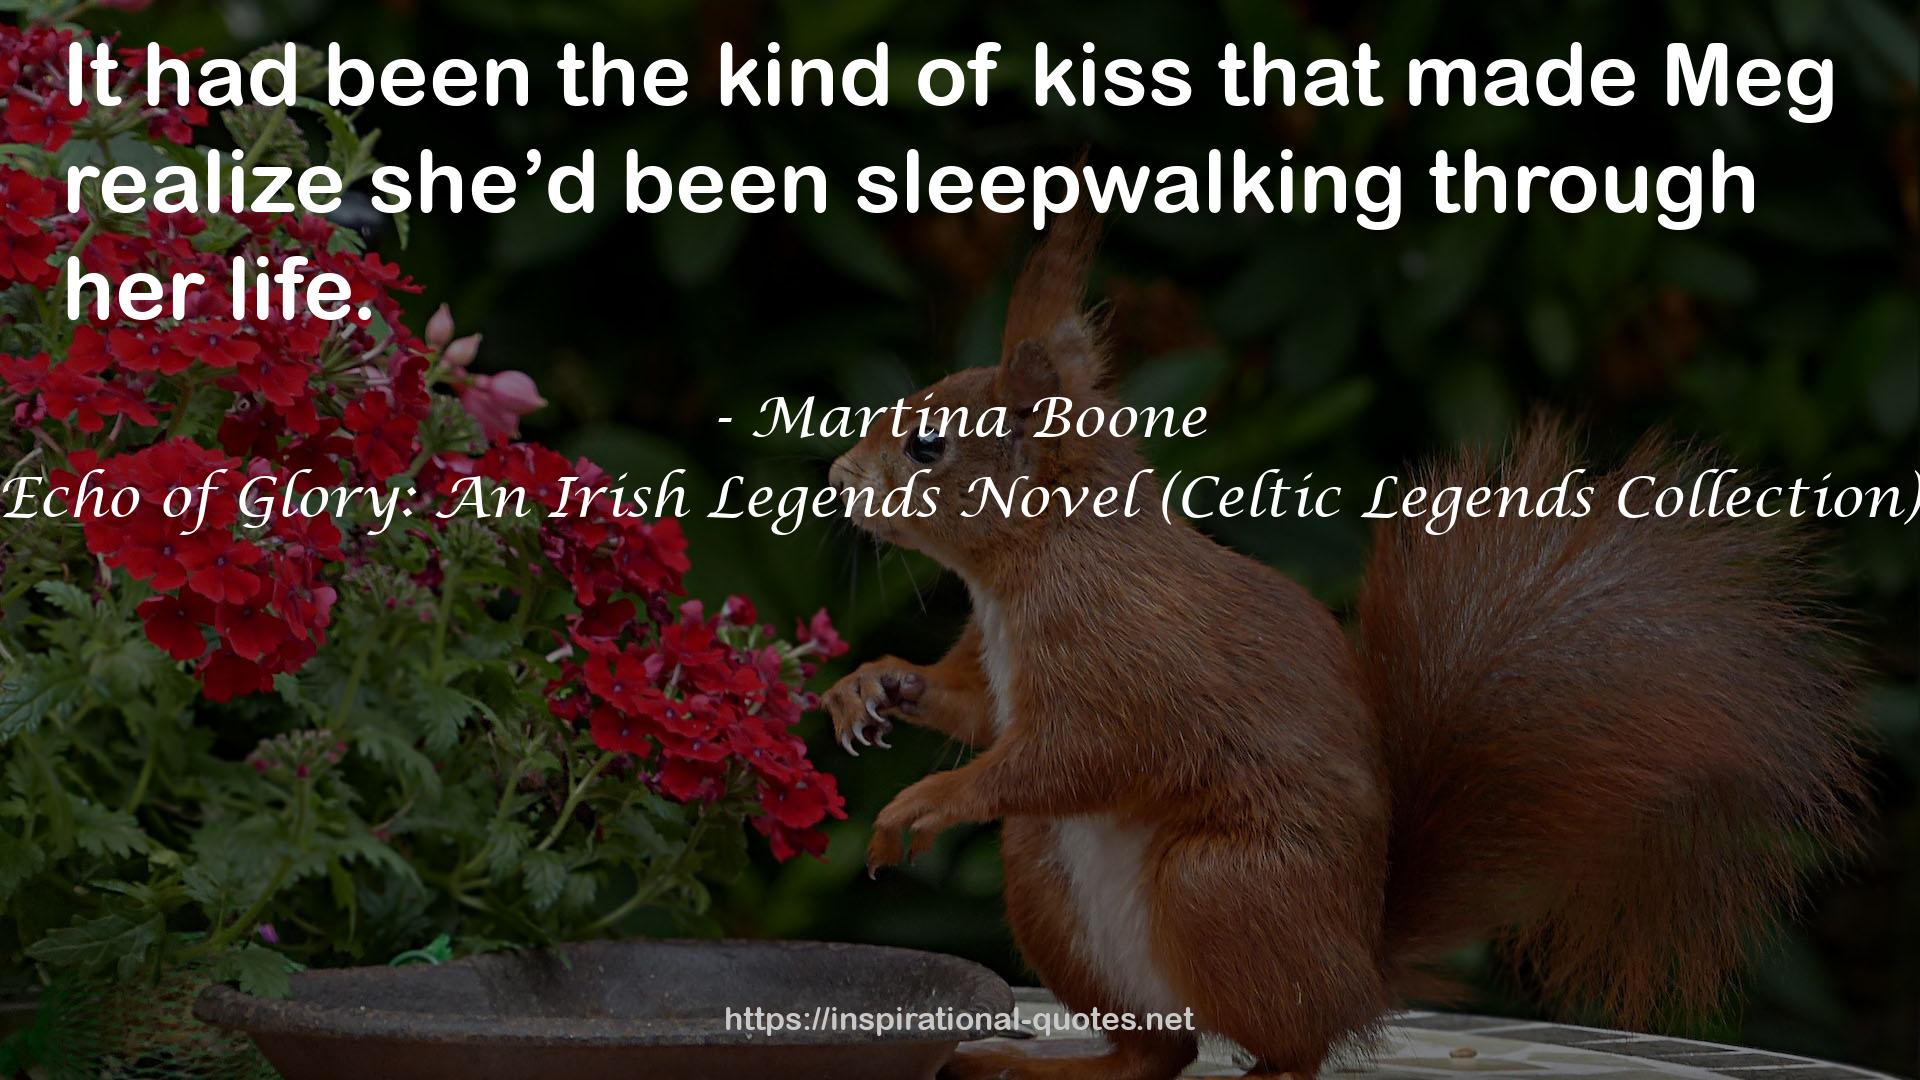 Echo of Glory: An Irish Legends Novel (Celtic Legends Collection) QUOTES